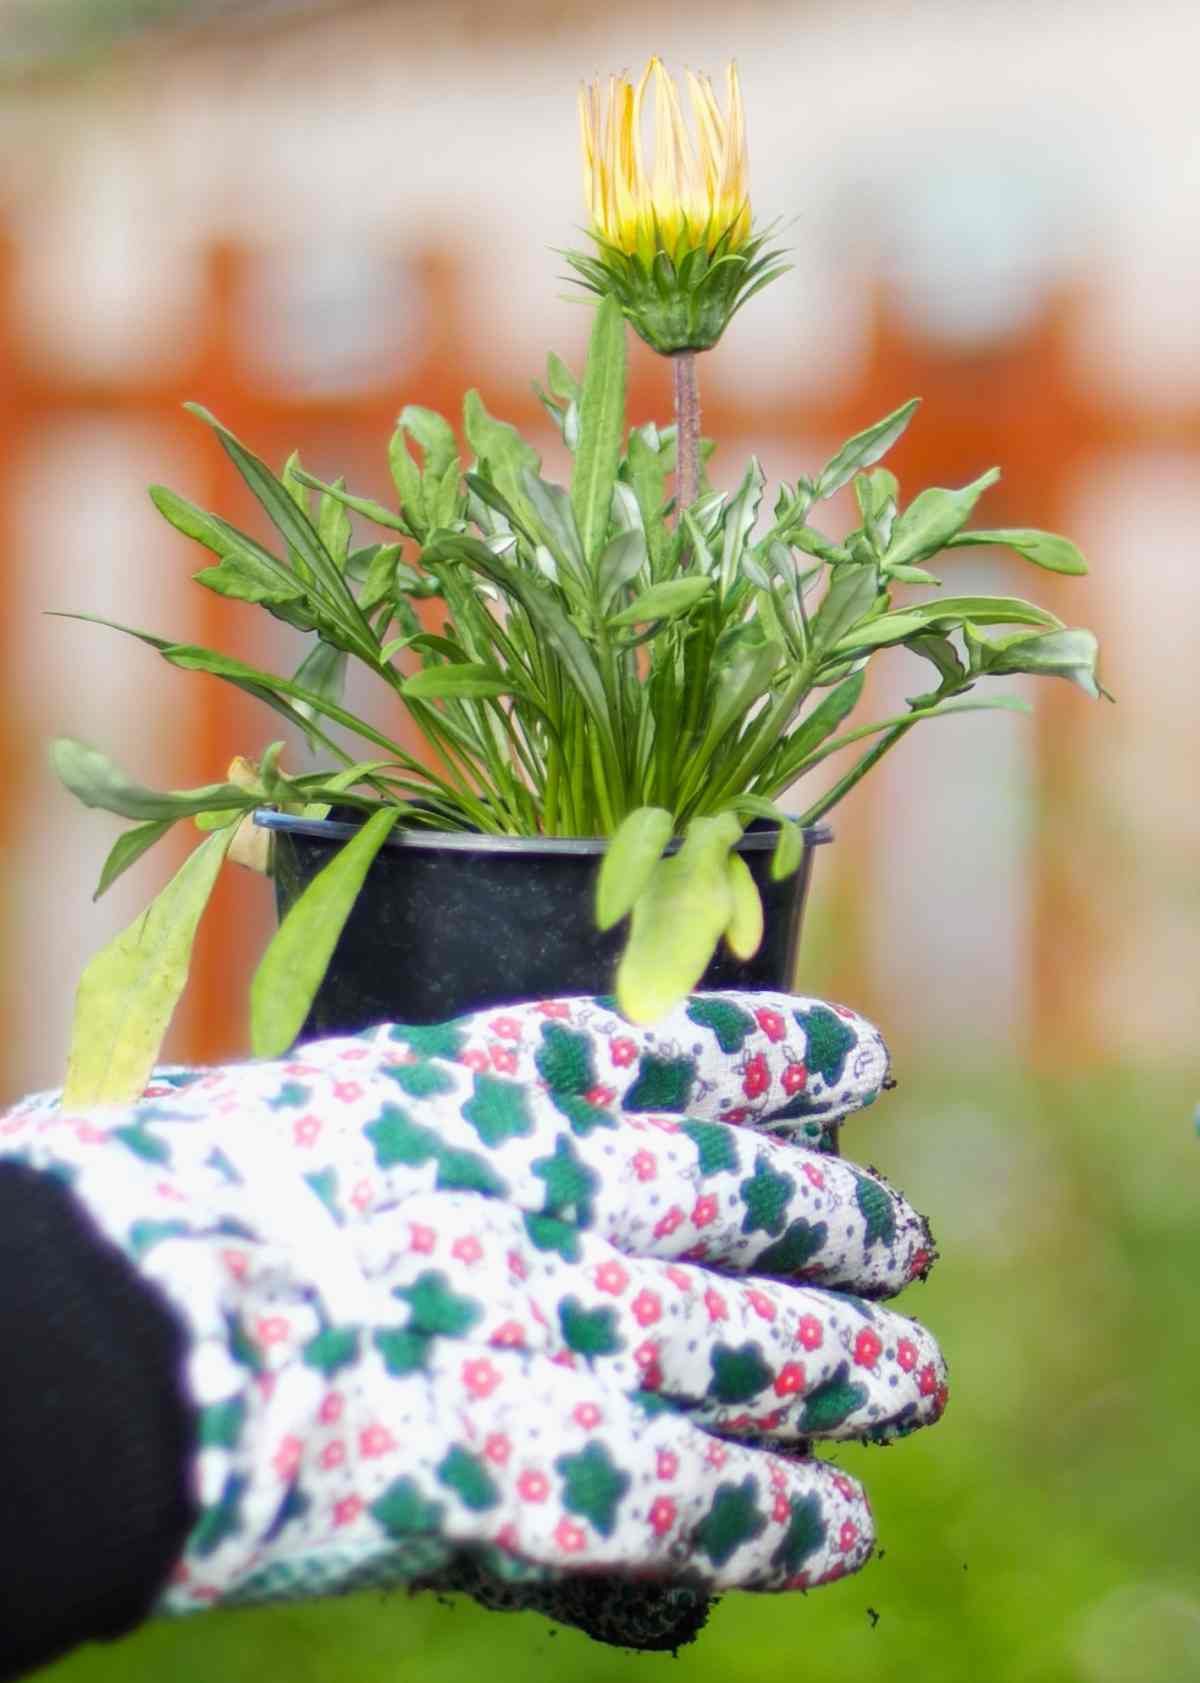 Hands with garden gloves holding a gazania plant.